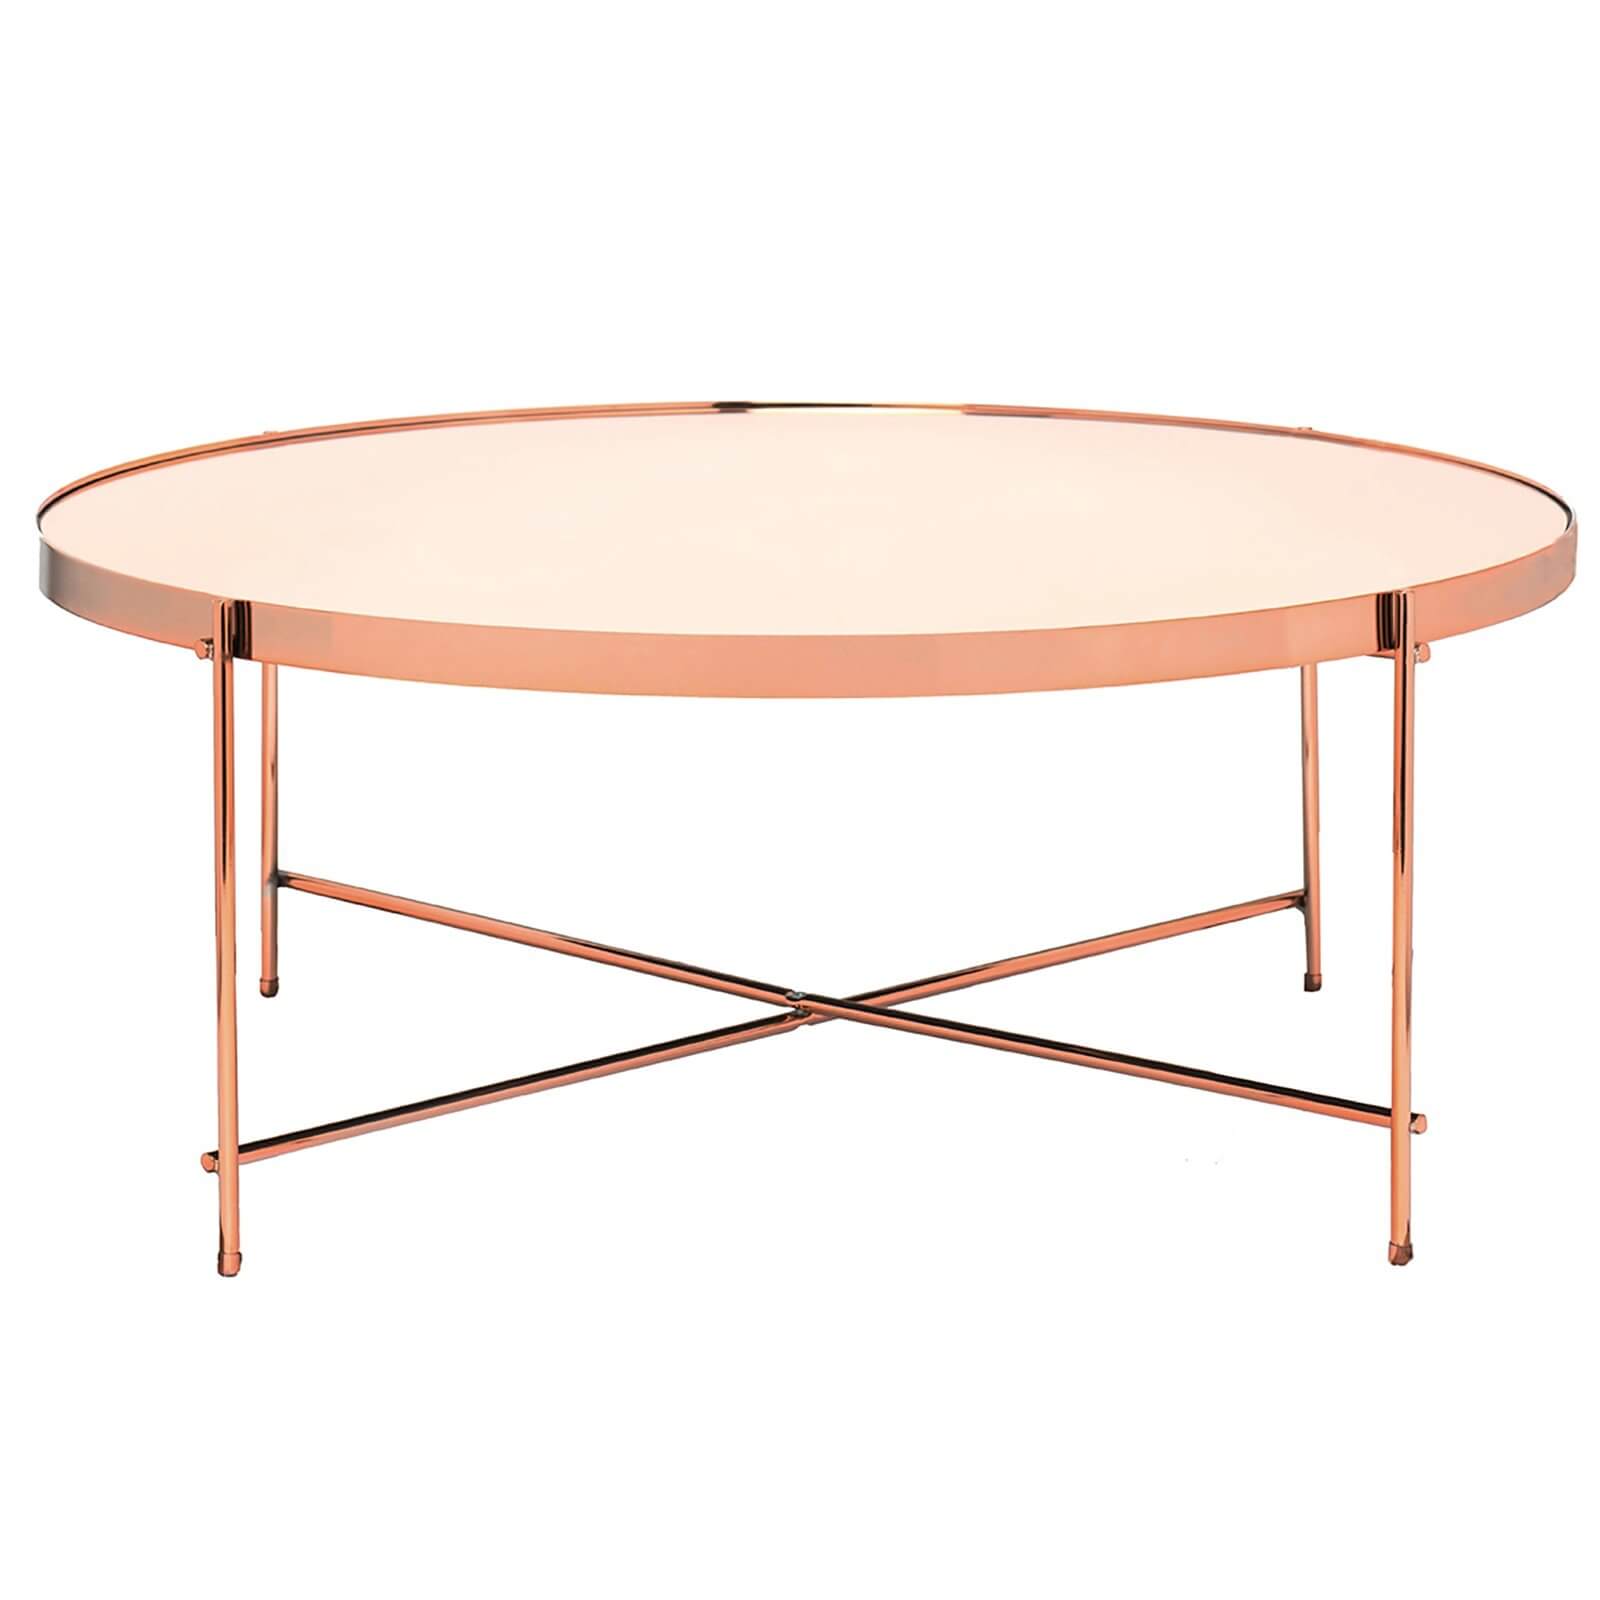 Oakland Coffee Table - Rose Gold